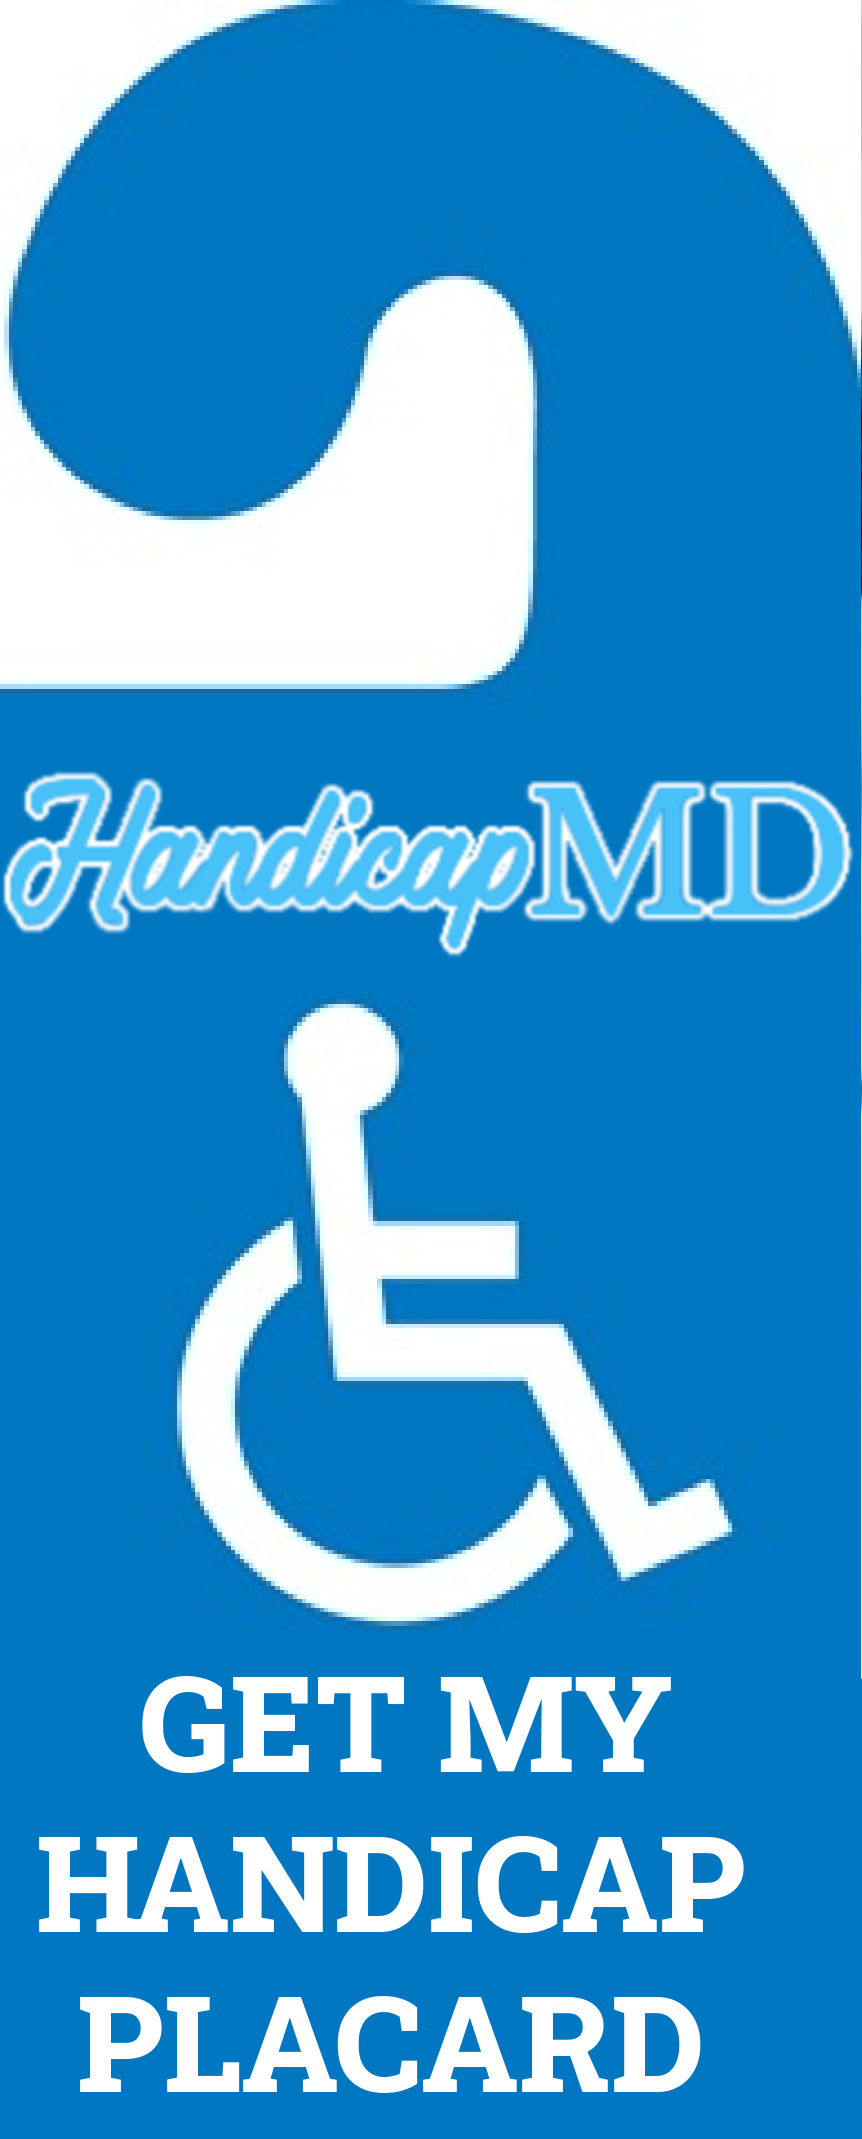 Myths vs. Facts: Debunking Common Misconceptions about Handicap Placards in Tennessee